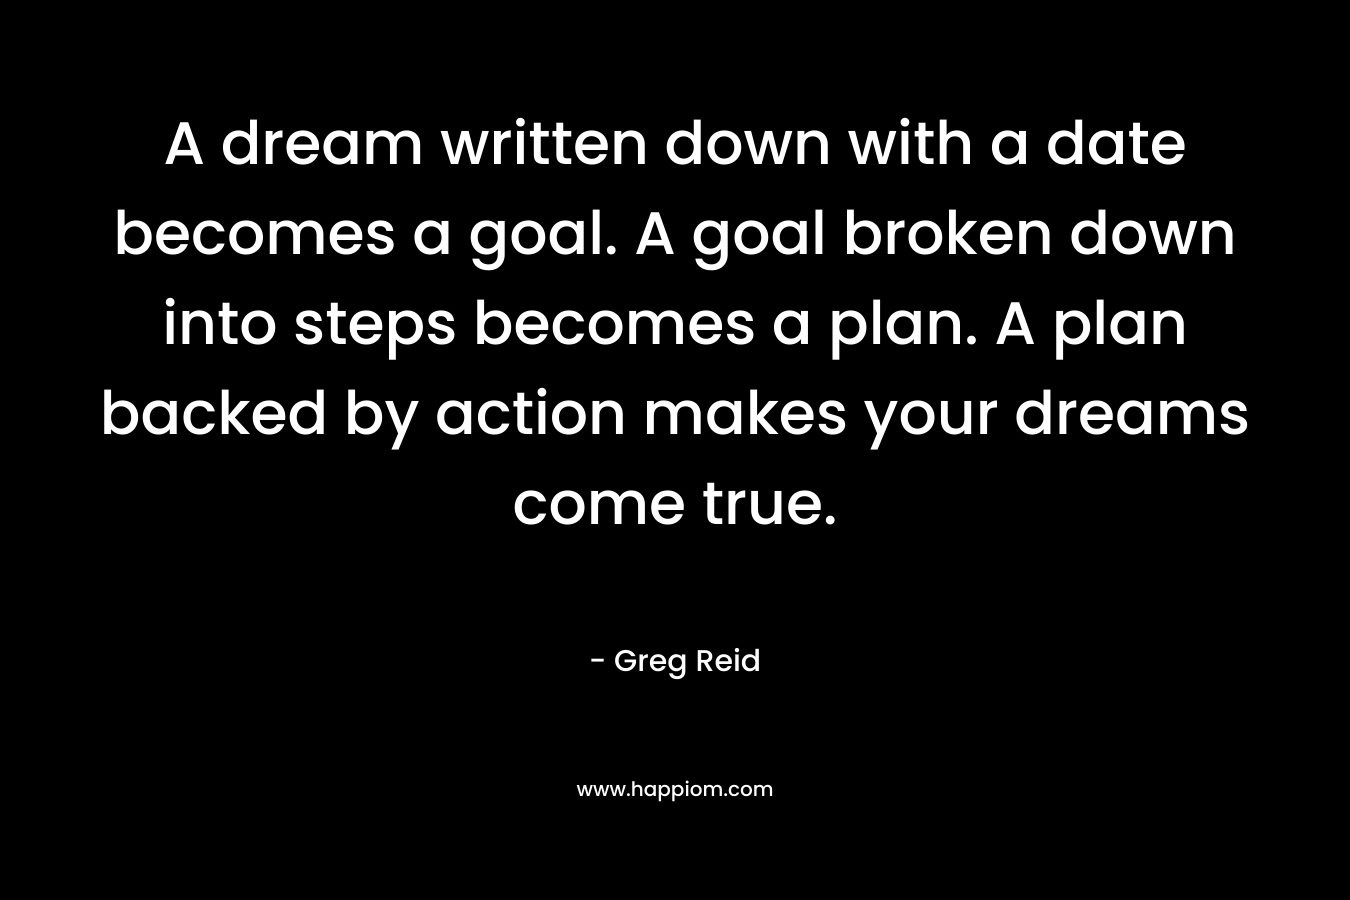 A dream written down with a date becomes a goal. A goal broken down into steps becomes a plan. A plan backed by action makes your dreams come true.